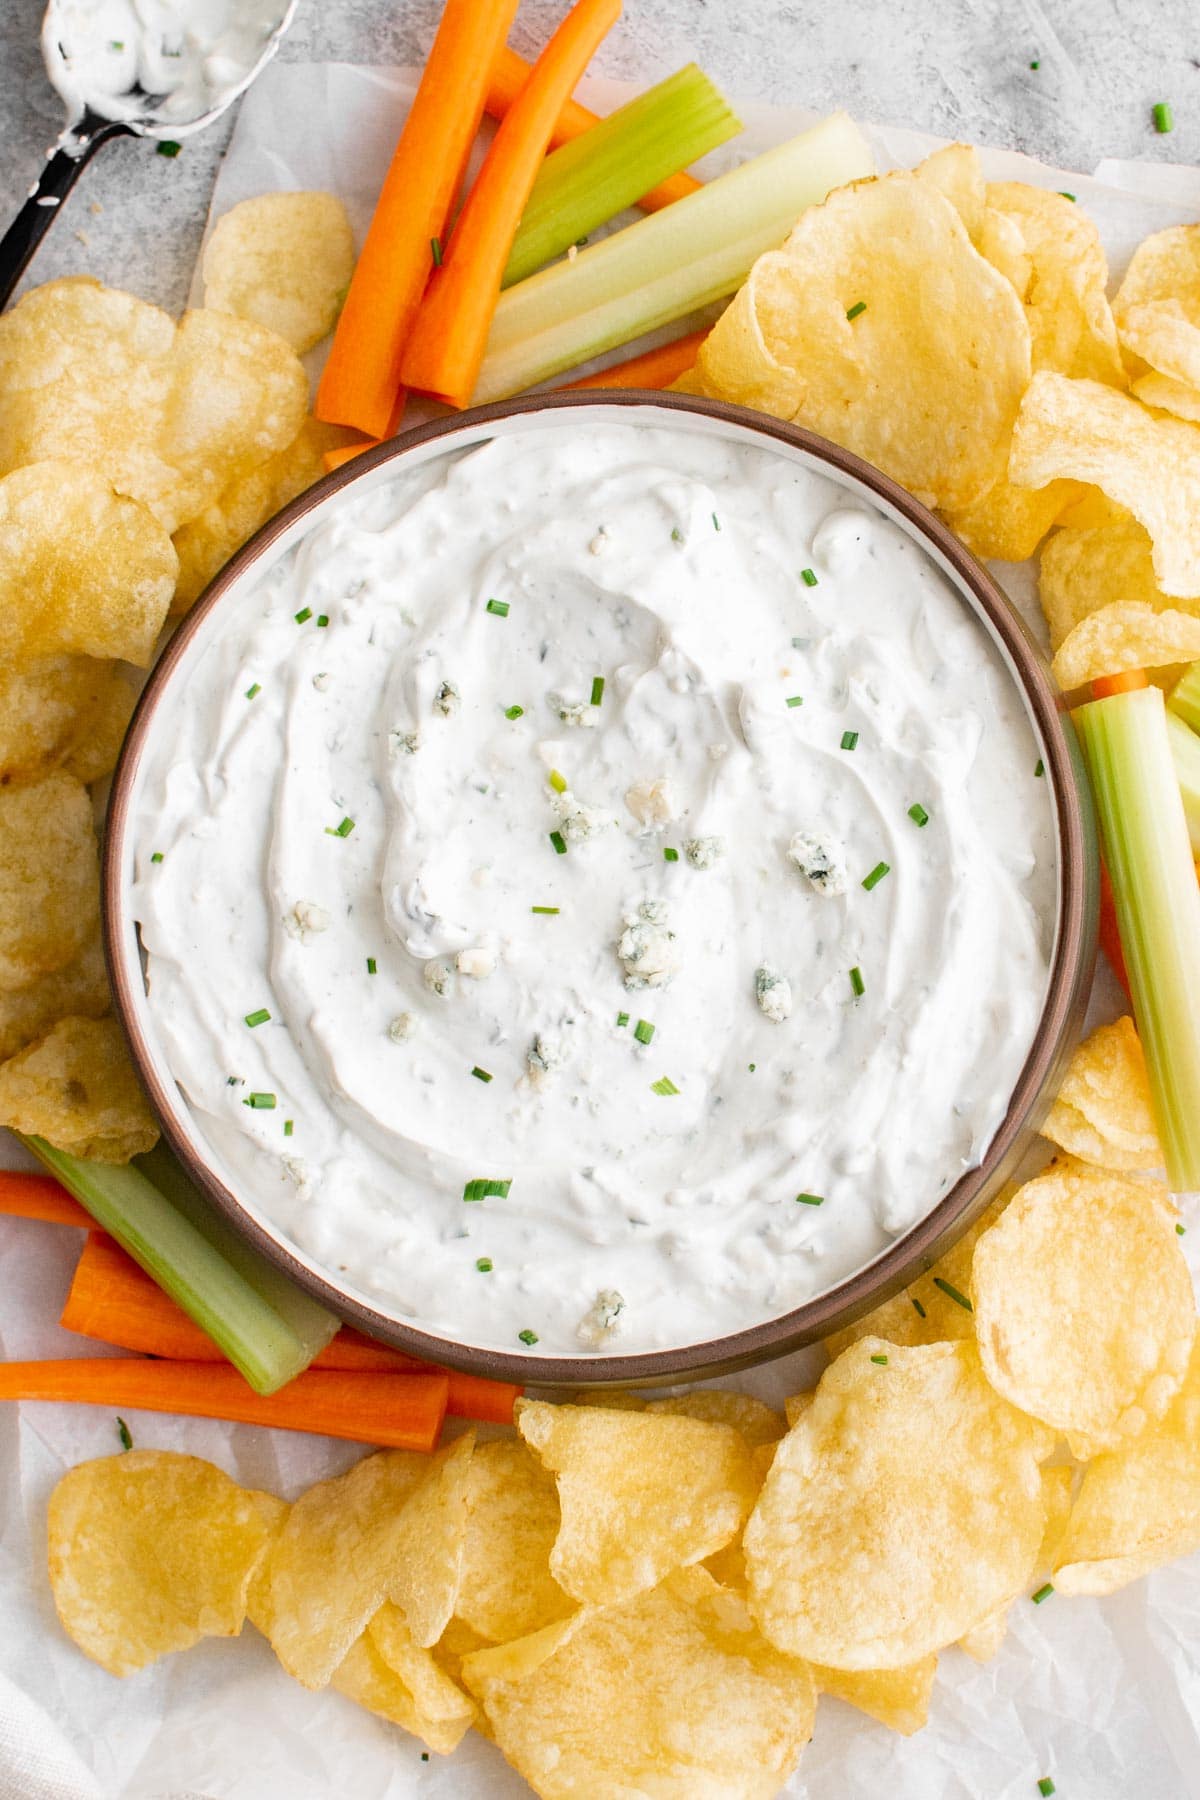 blue cheese dip in a bowl surrounded by carrot and celery sticks and potato chips